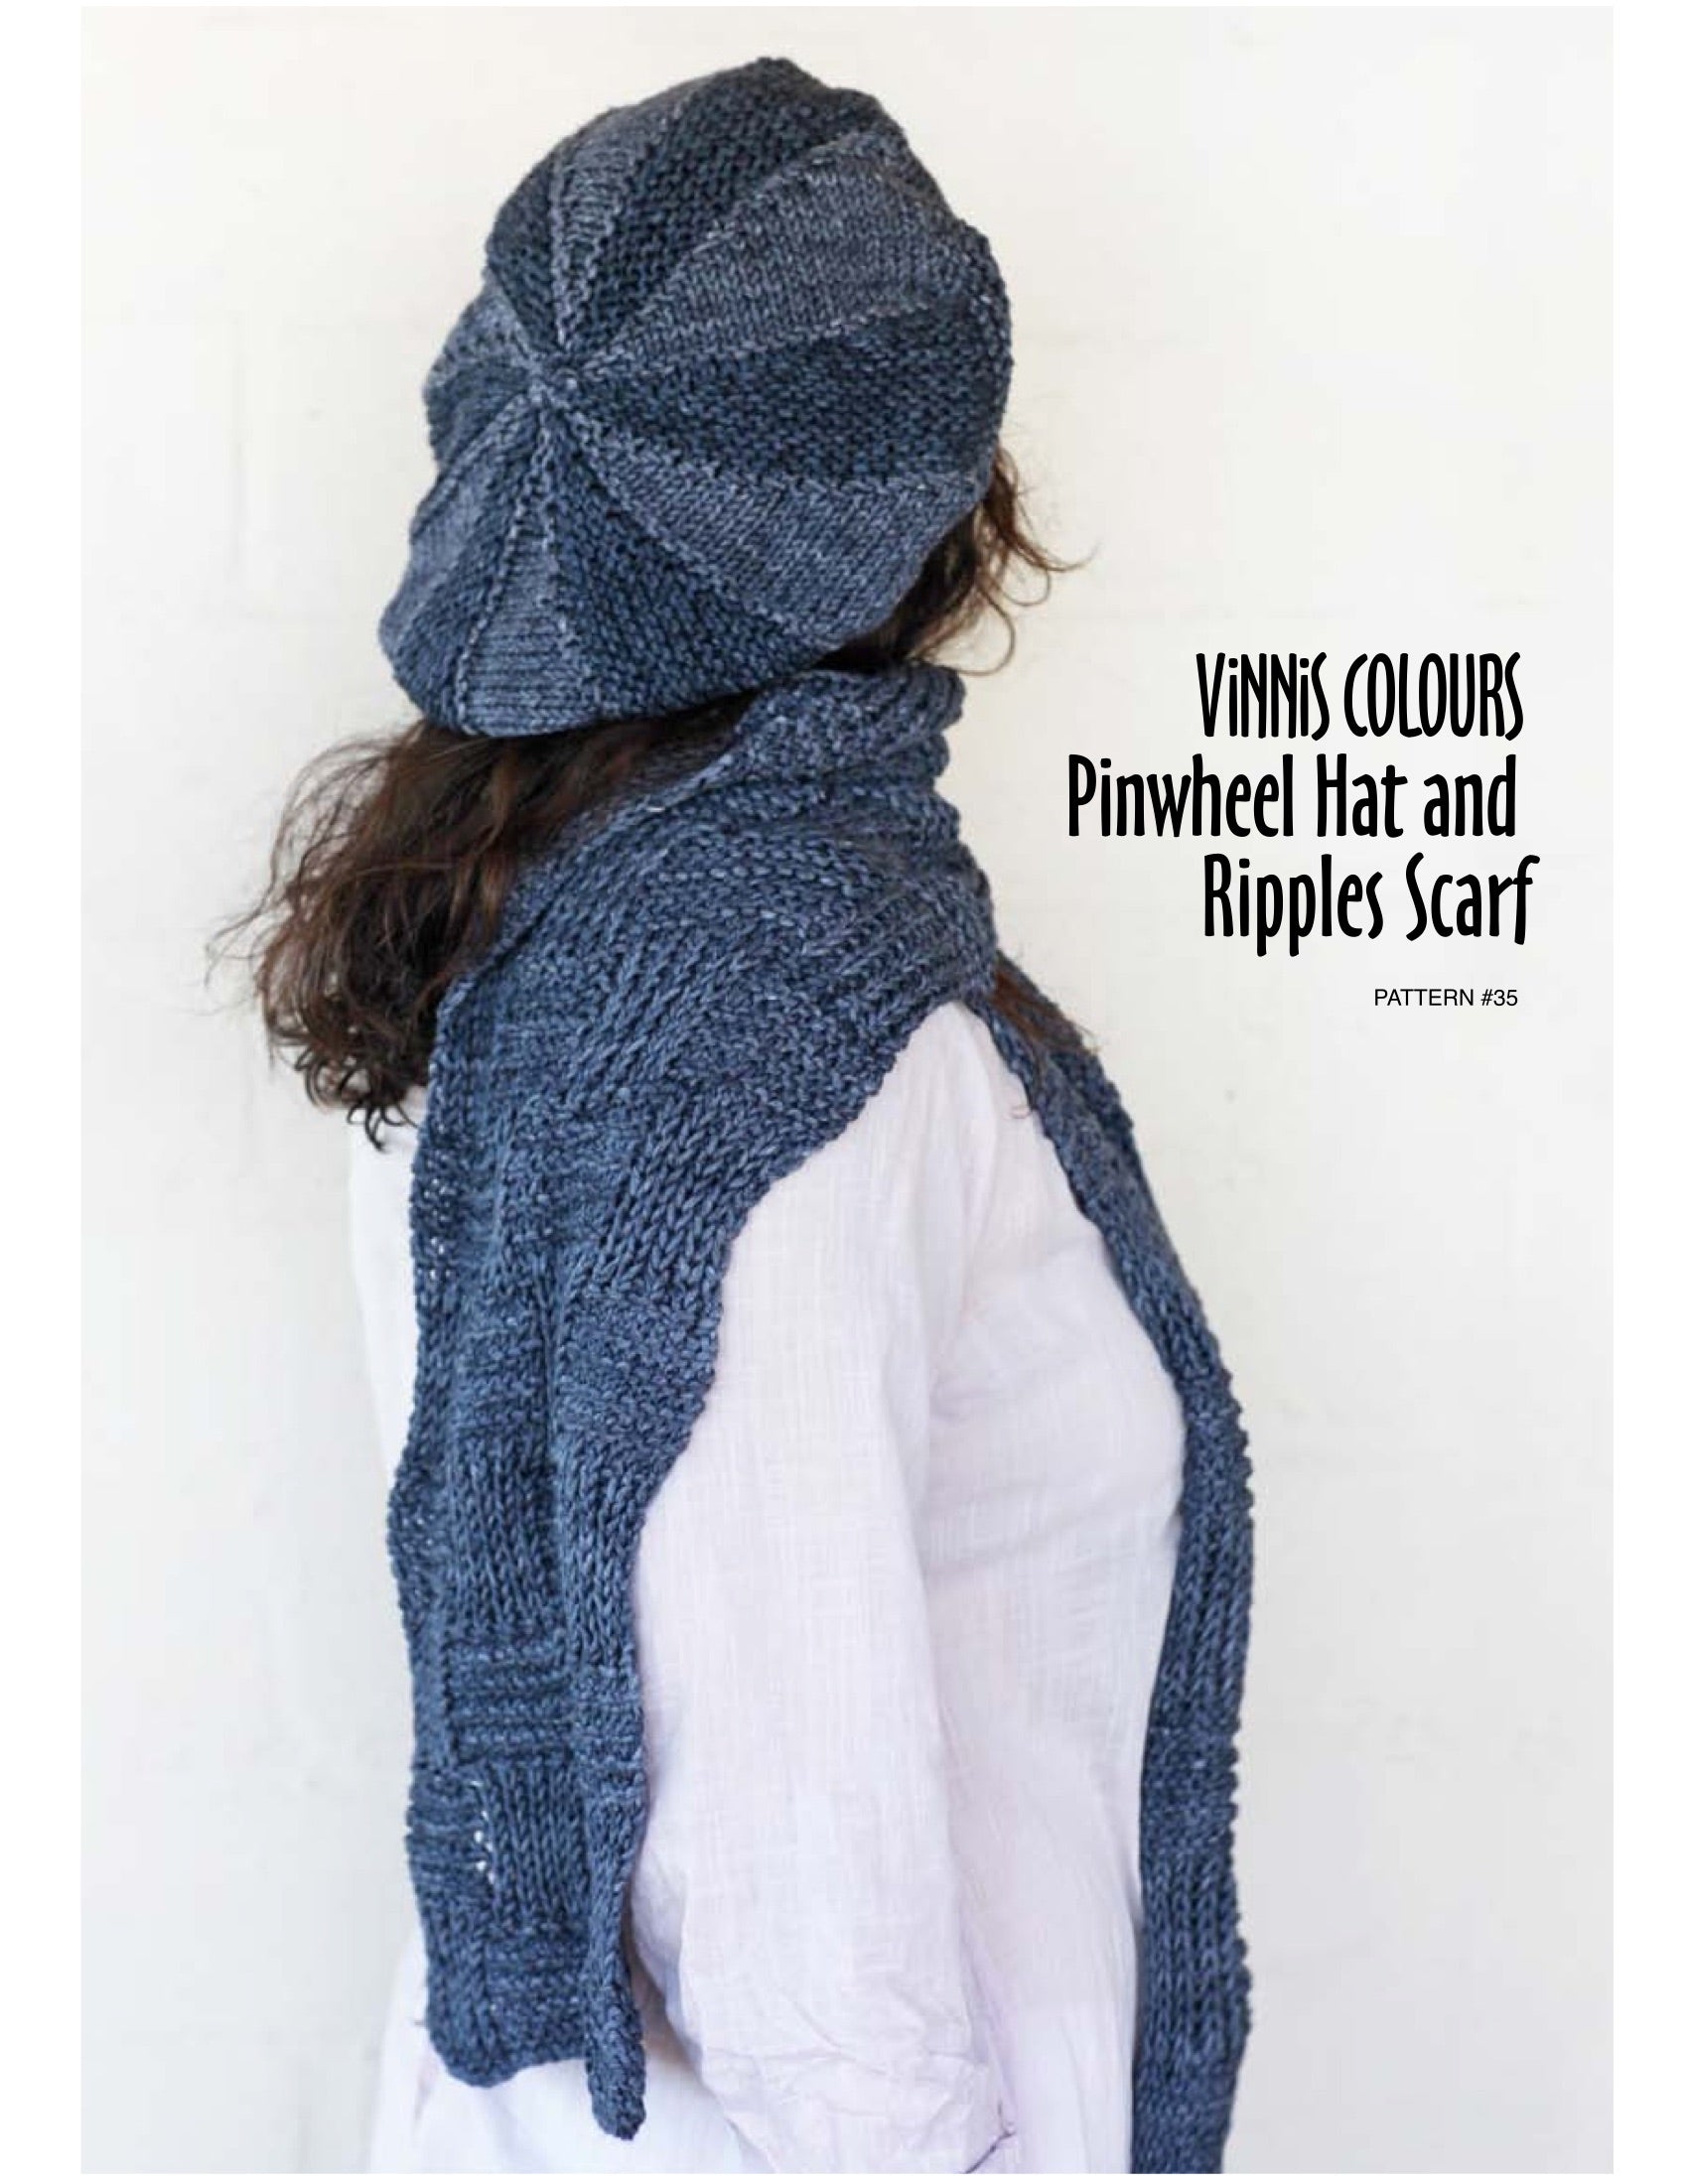 VCDL - P035 - Pinwheel Hat and Ripples Scarf